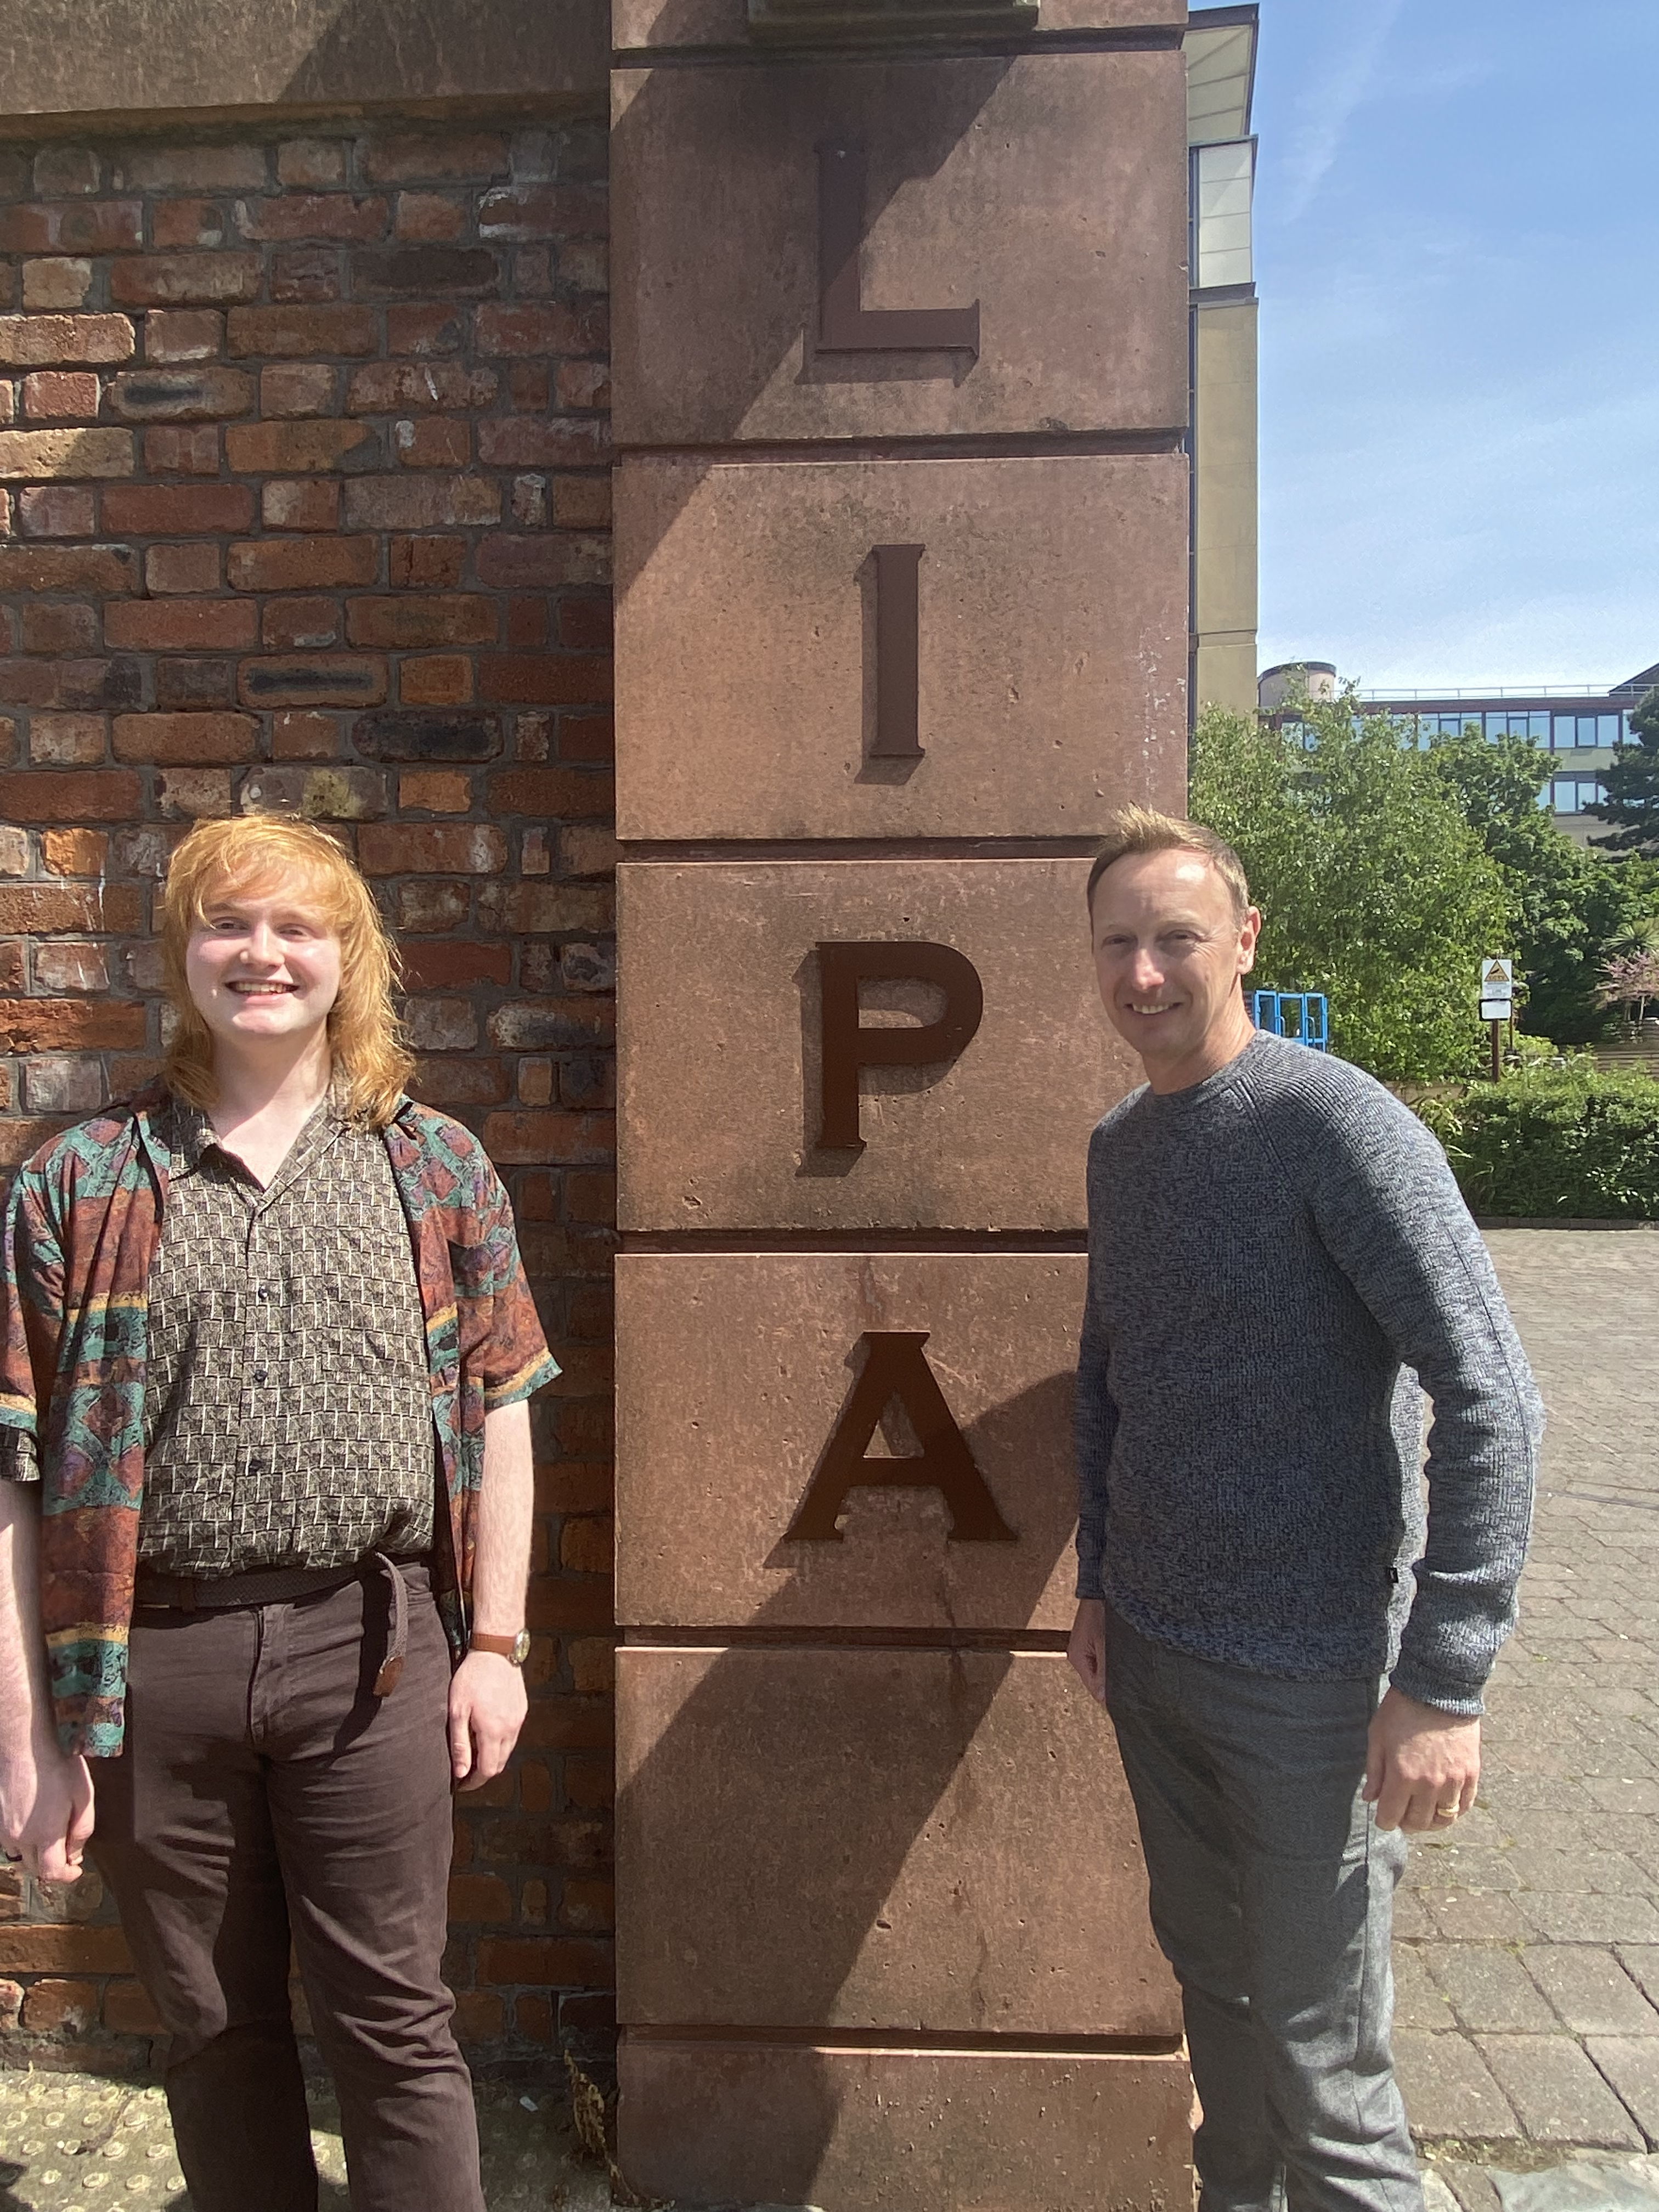 Alex Snape, a talented first-year student of the BA (Hons) Sound Technology course at LIPA together with Tim Sherratt, Strategic Planning Manager at Sennheiser